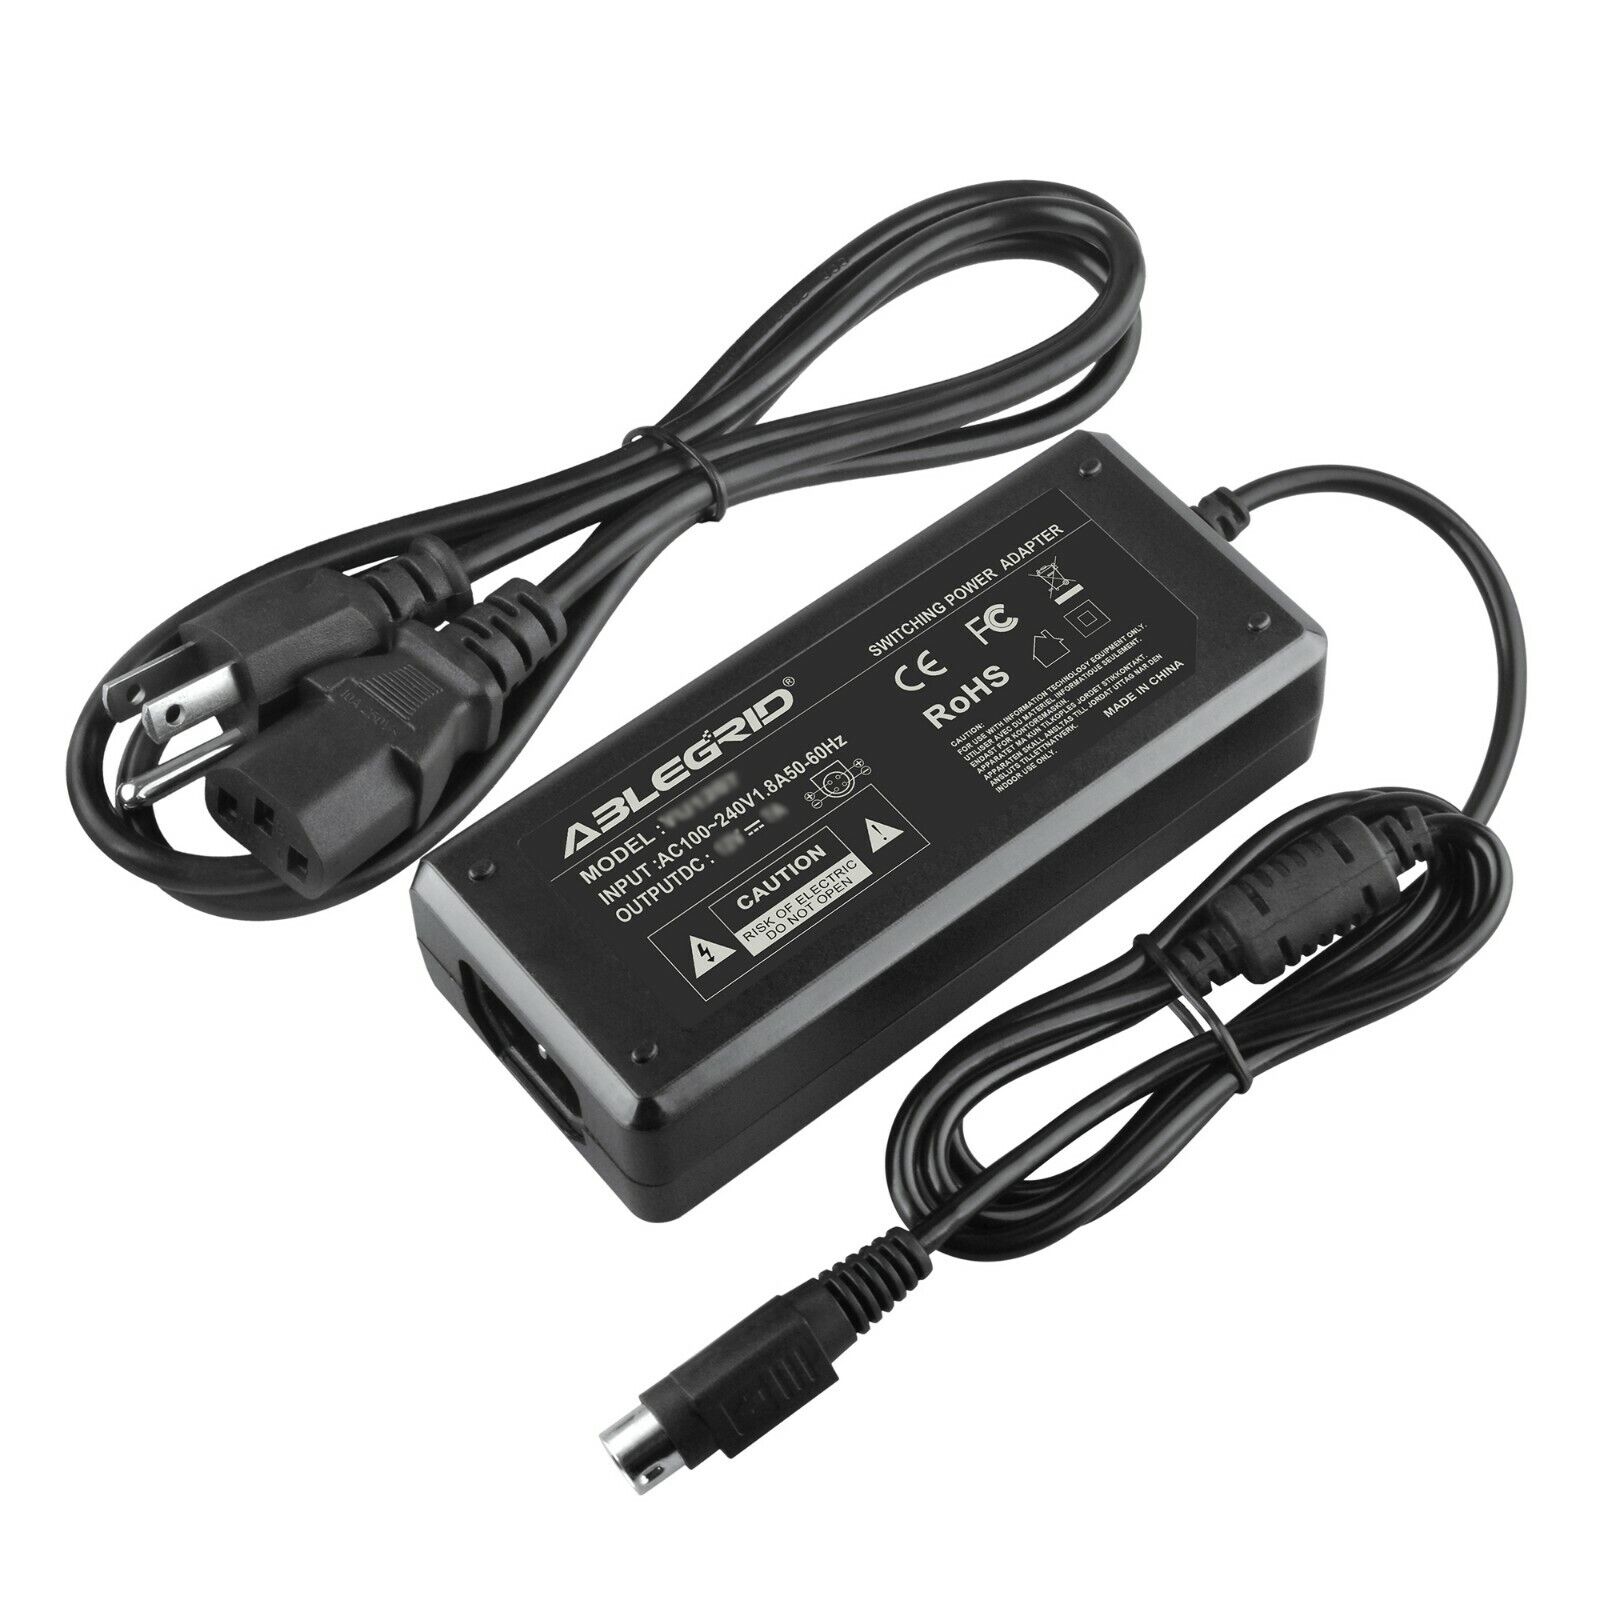 12V 7A AC Adapter Power Supply for LCD TV 4 Prong UP 2 Pin Positive Mains